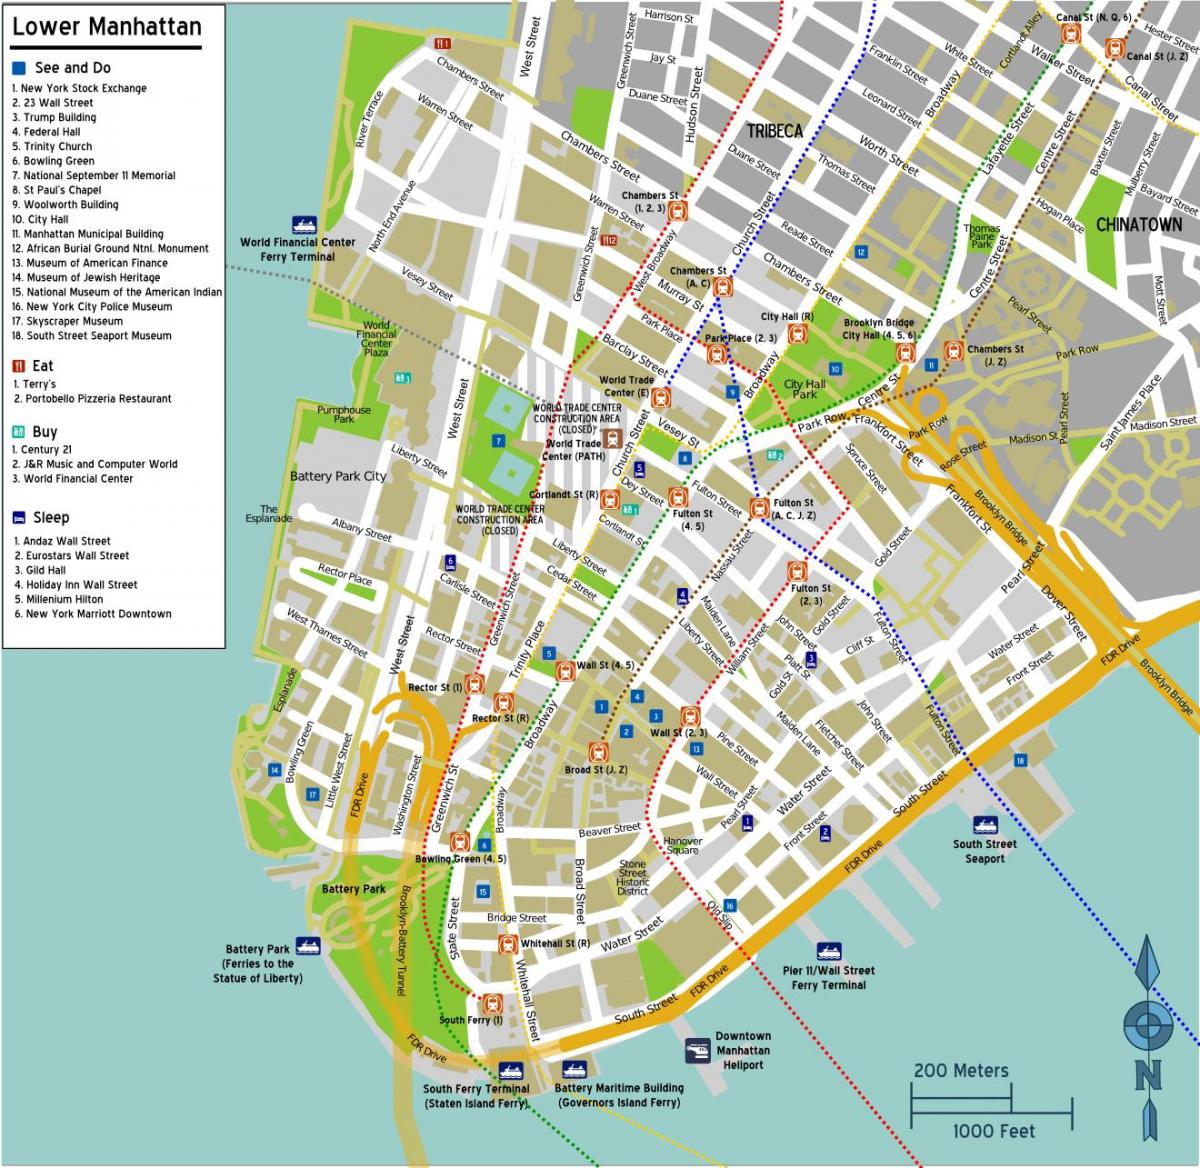 map of lower Manhattan with street names